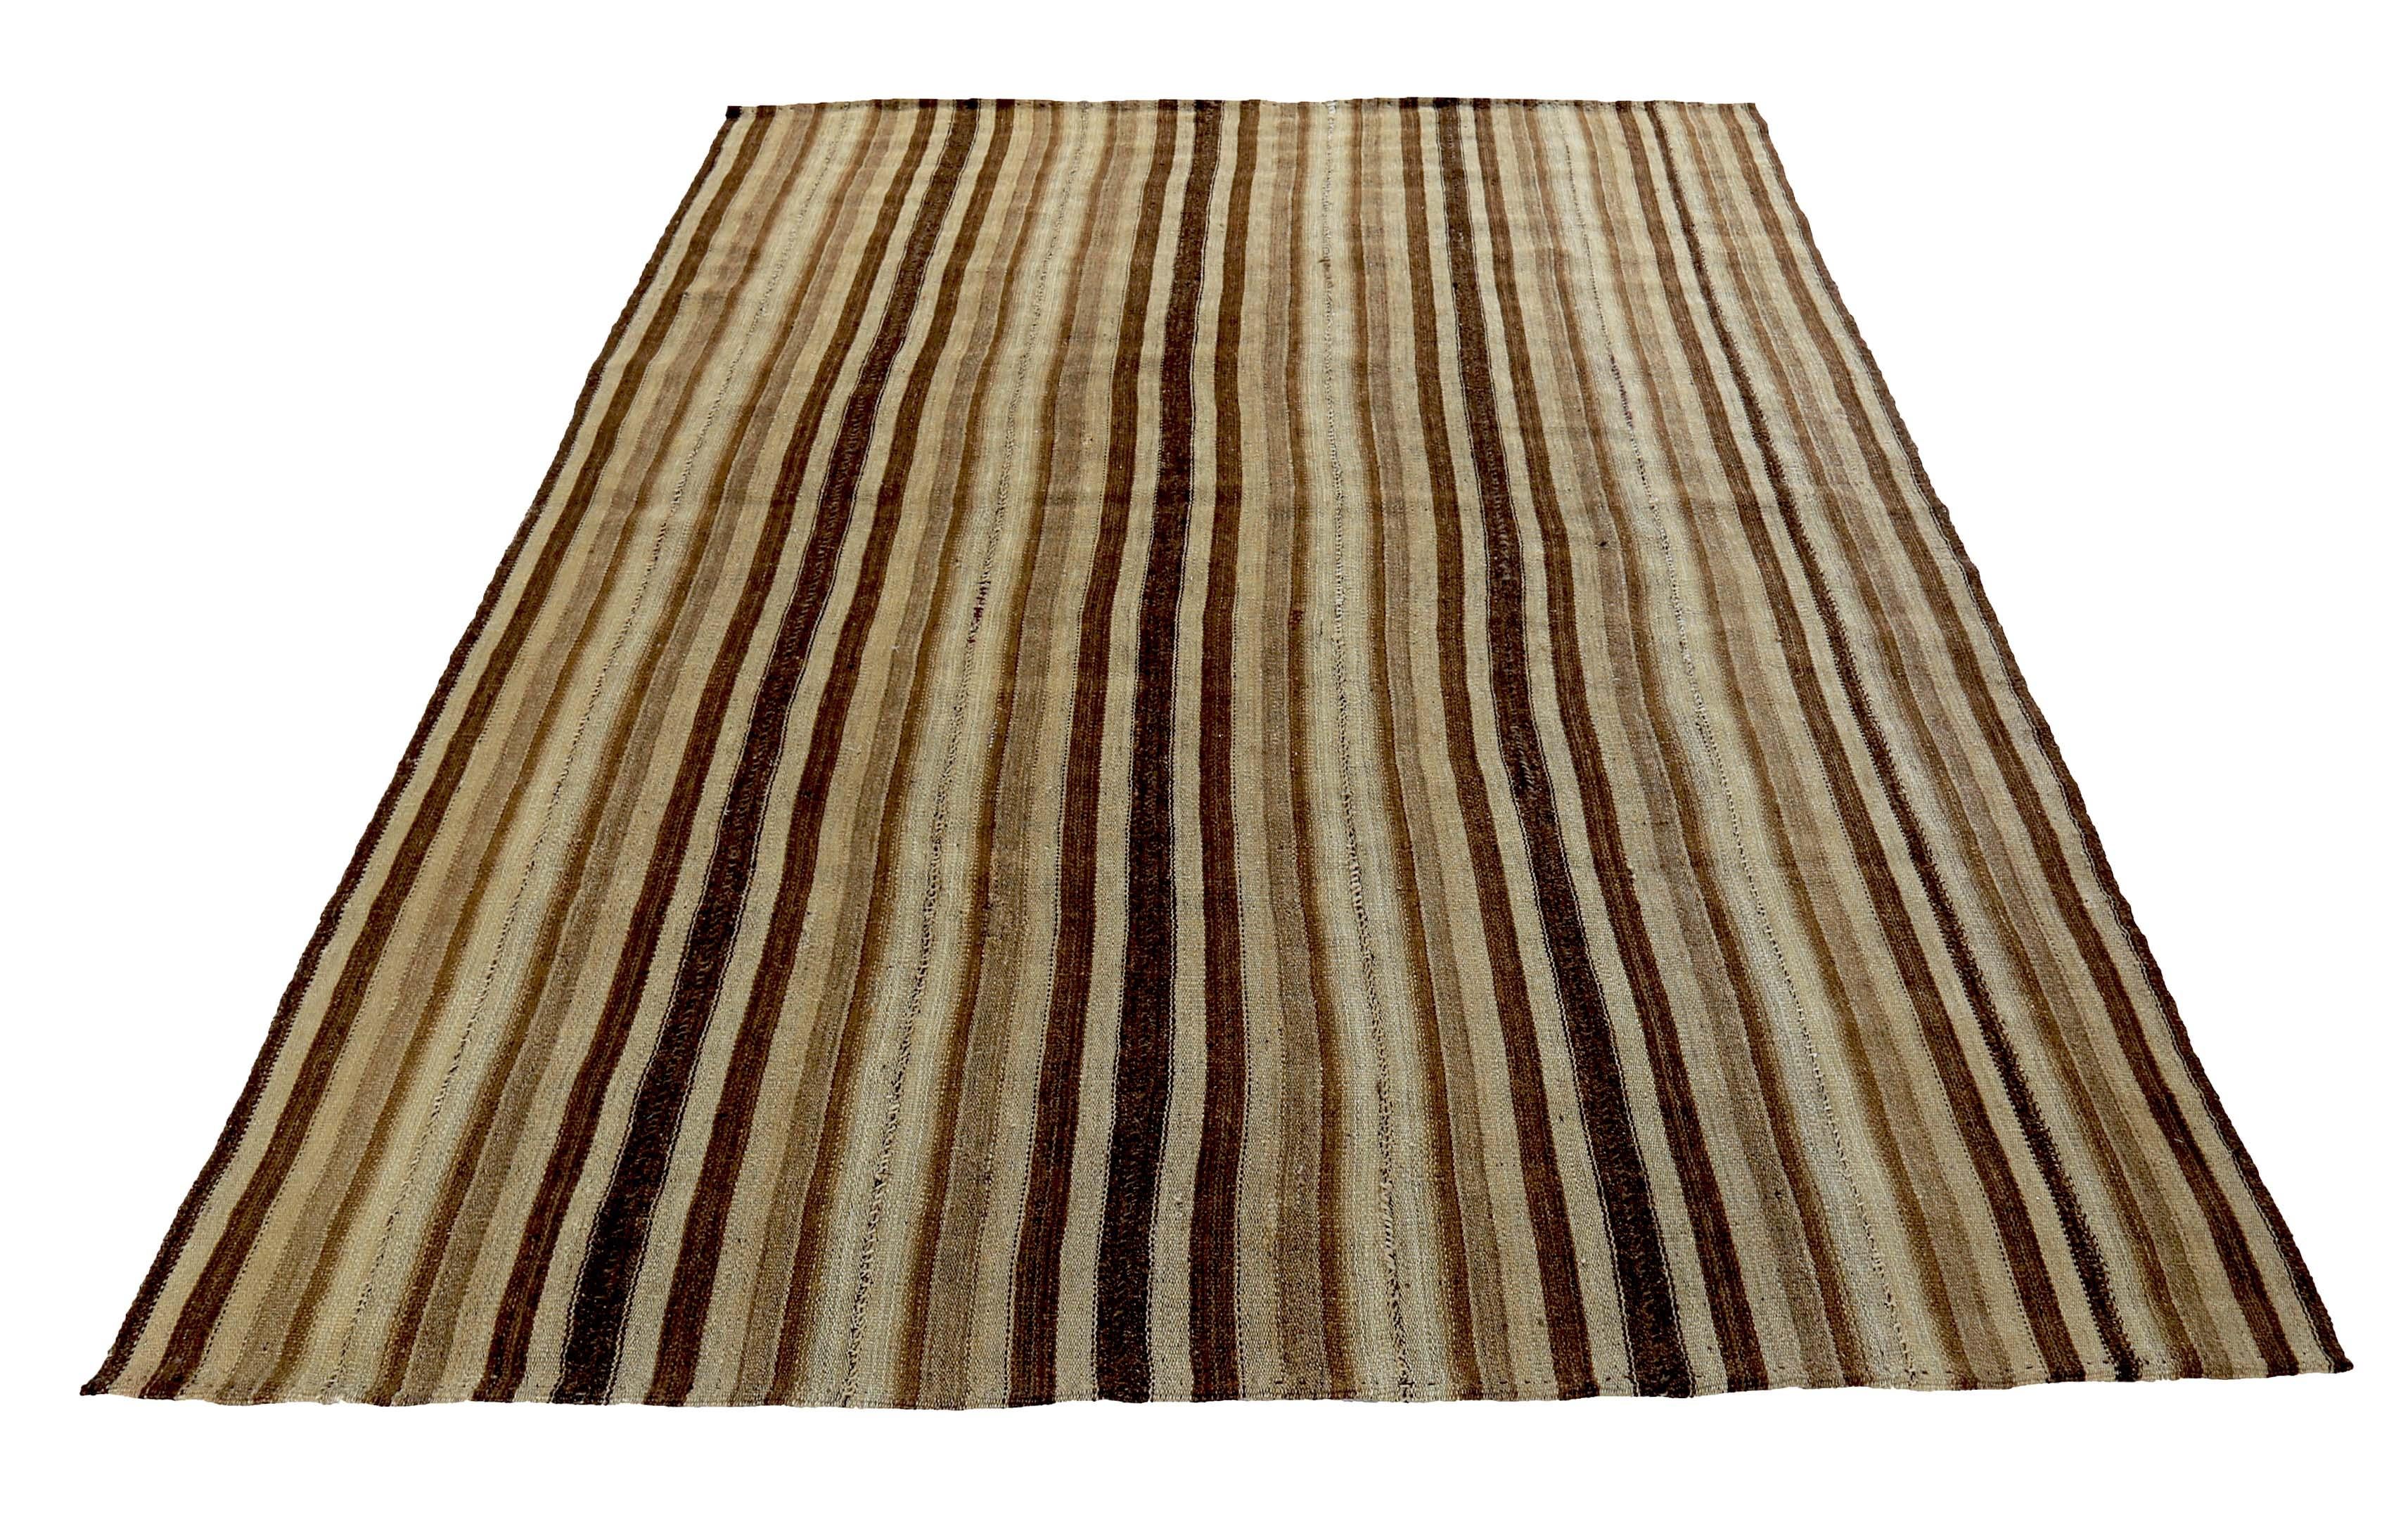 Contemporary Turkish rug handwoven from the finest sheep’s wool and colored with all-natural vegetable dyes that are safe for humans and pets. It’s a traditional Kilim flat-weave design featuring black and brown stripes on a beige field. It’s a